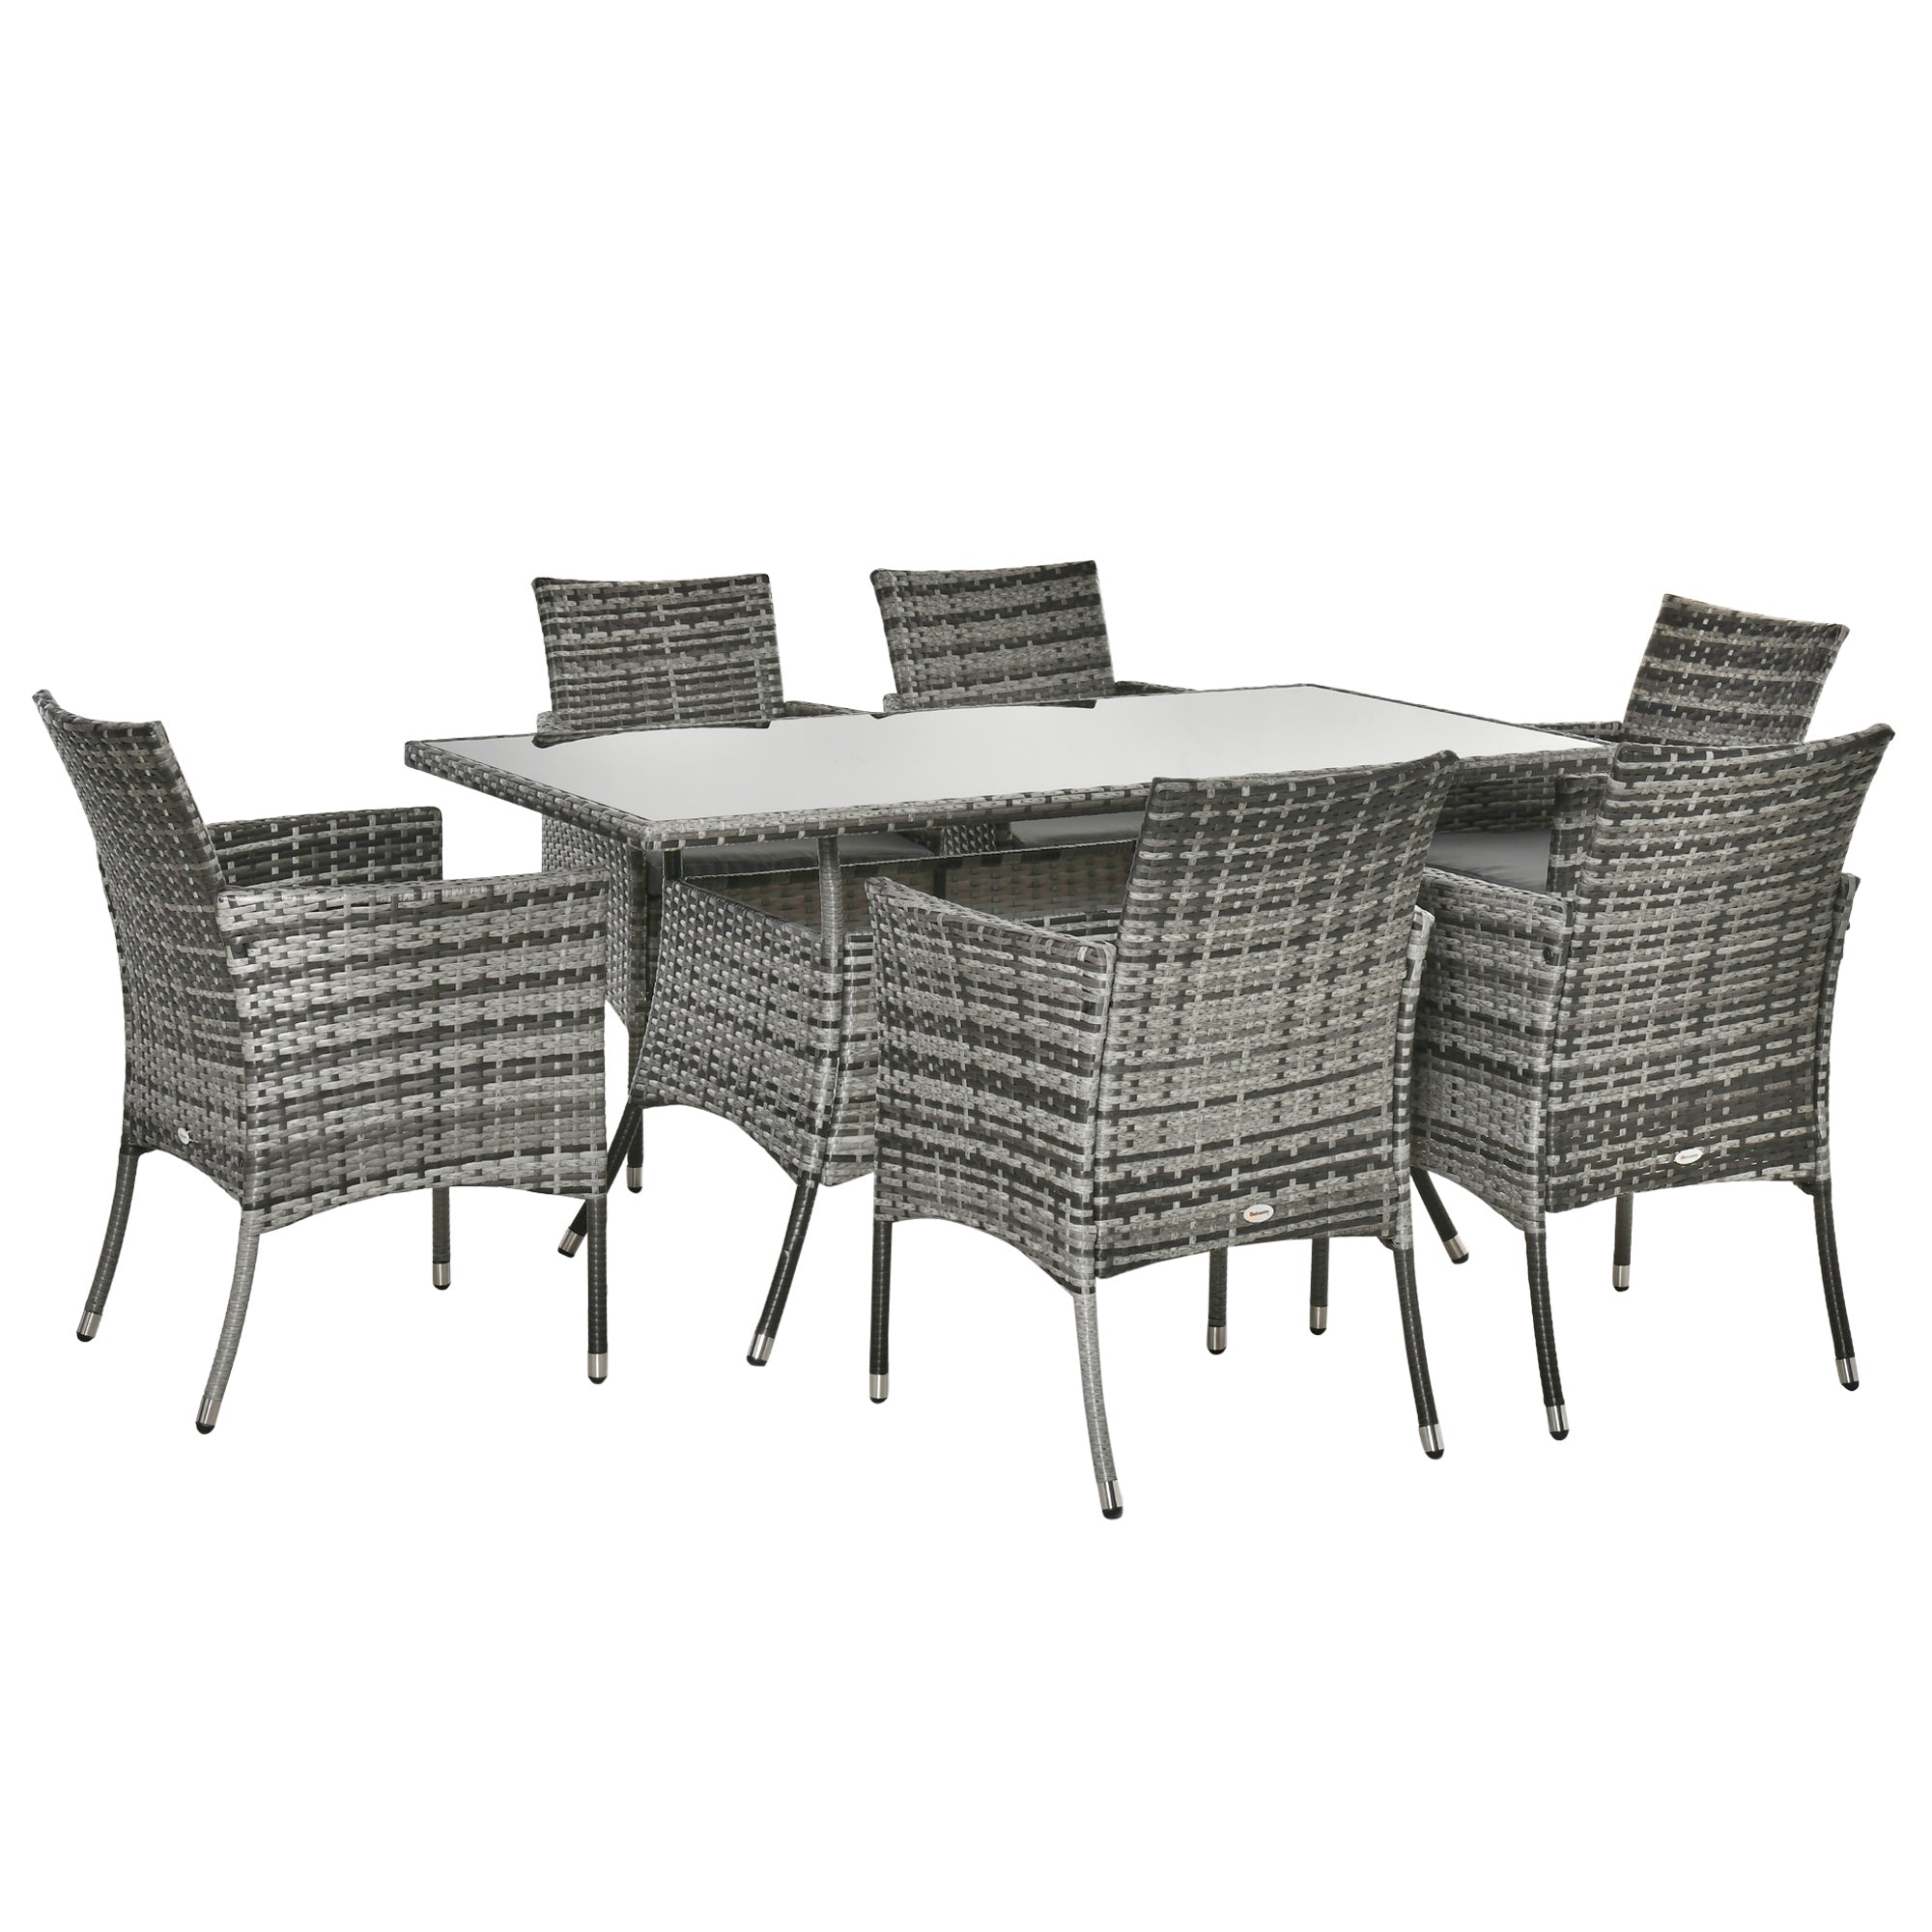 Outsunny 7pc Rattan Garden Furniture Dining Set Wicker Patio Conservatory Seater  | TJ Hughes Grey